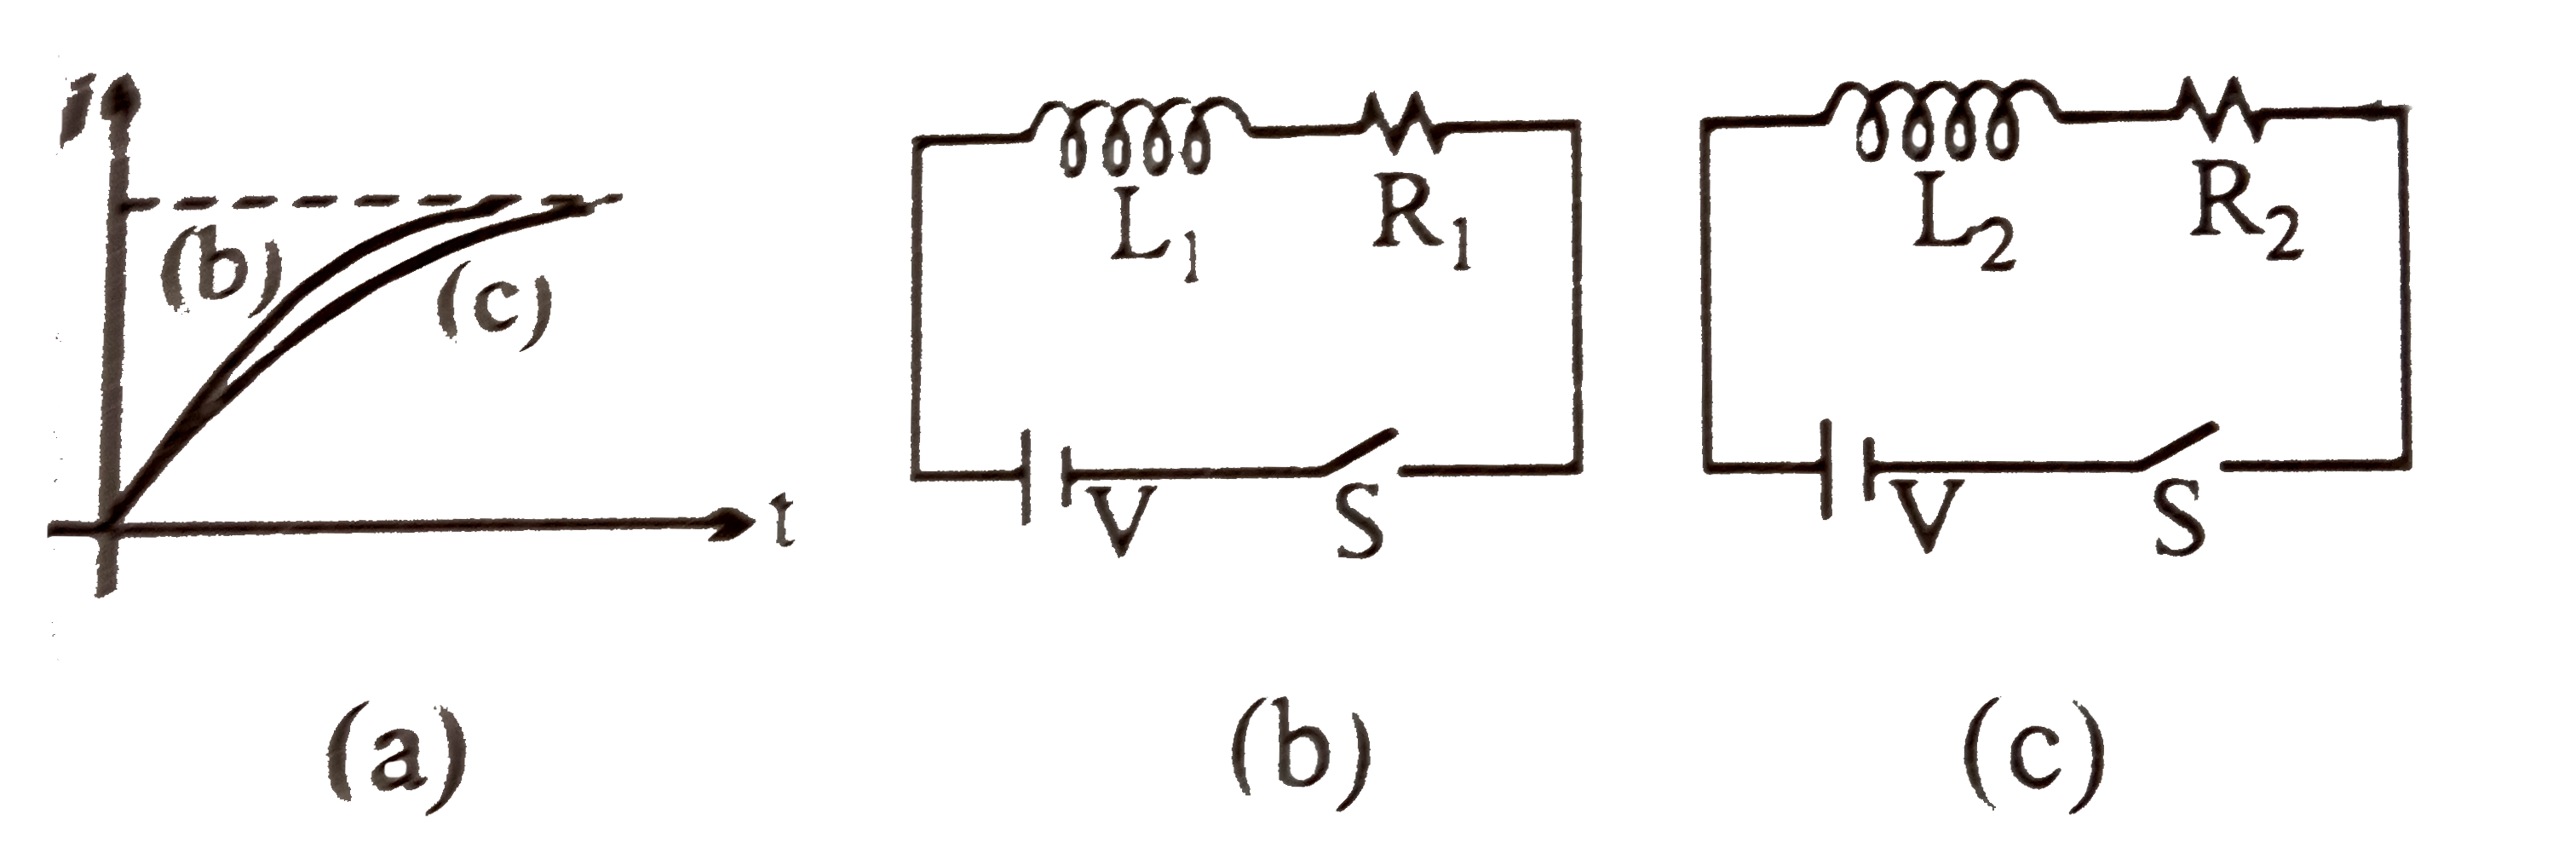 Current growth in two L-R circuits (b) and (c ) as shown in figure (a). Let L(1), L(2), R(1) and R(2) be the corresponding values in two circuits. Then